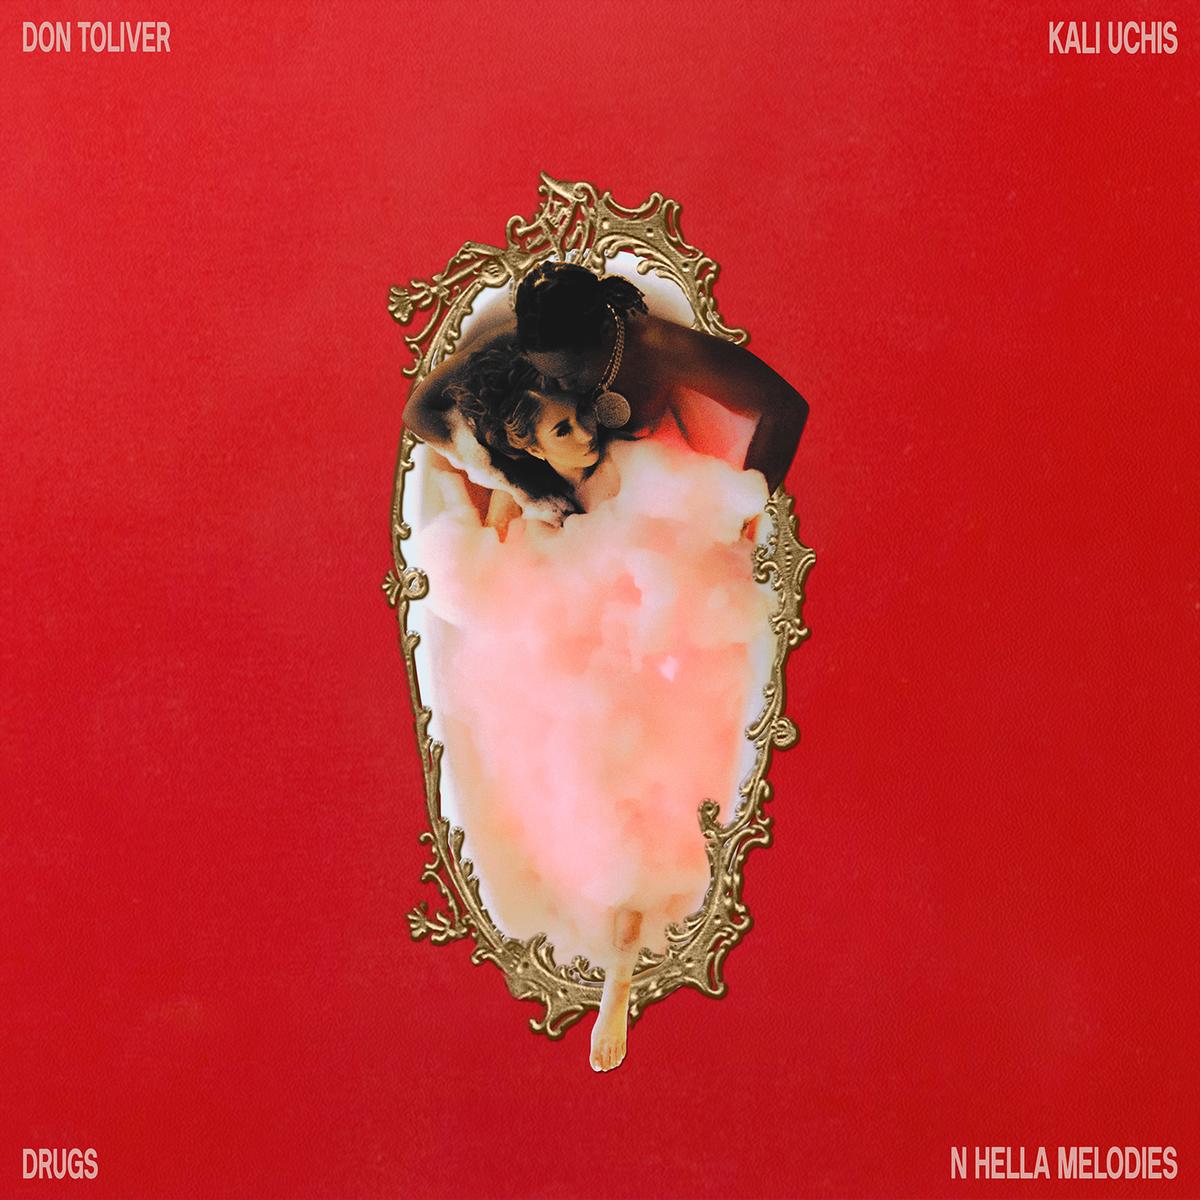 Don Toliver & Kali Uchis Connect For “Drugs N Hella Melodies”